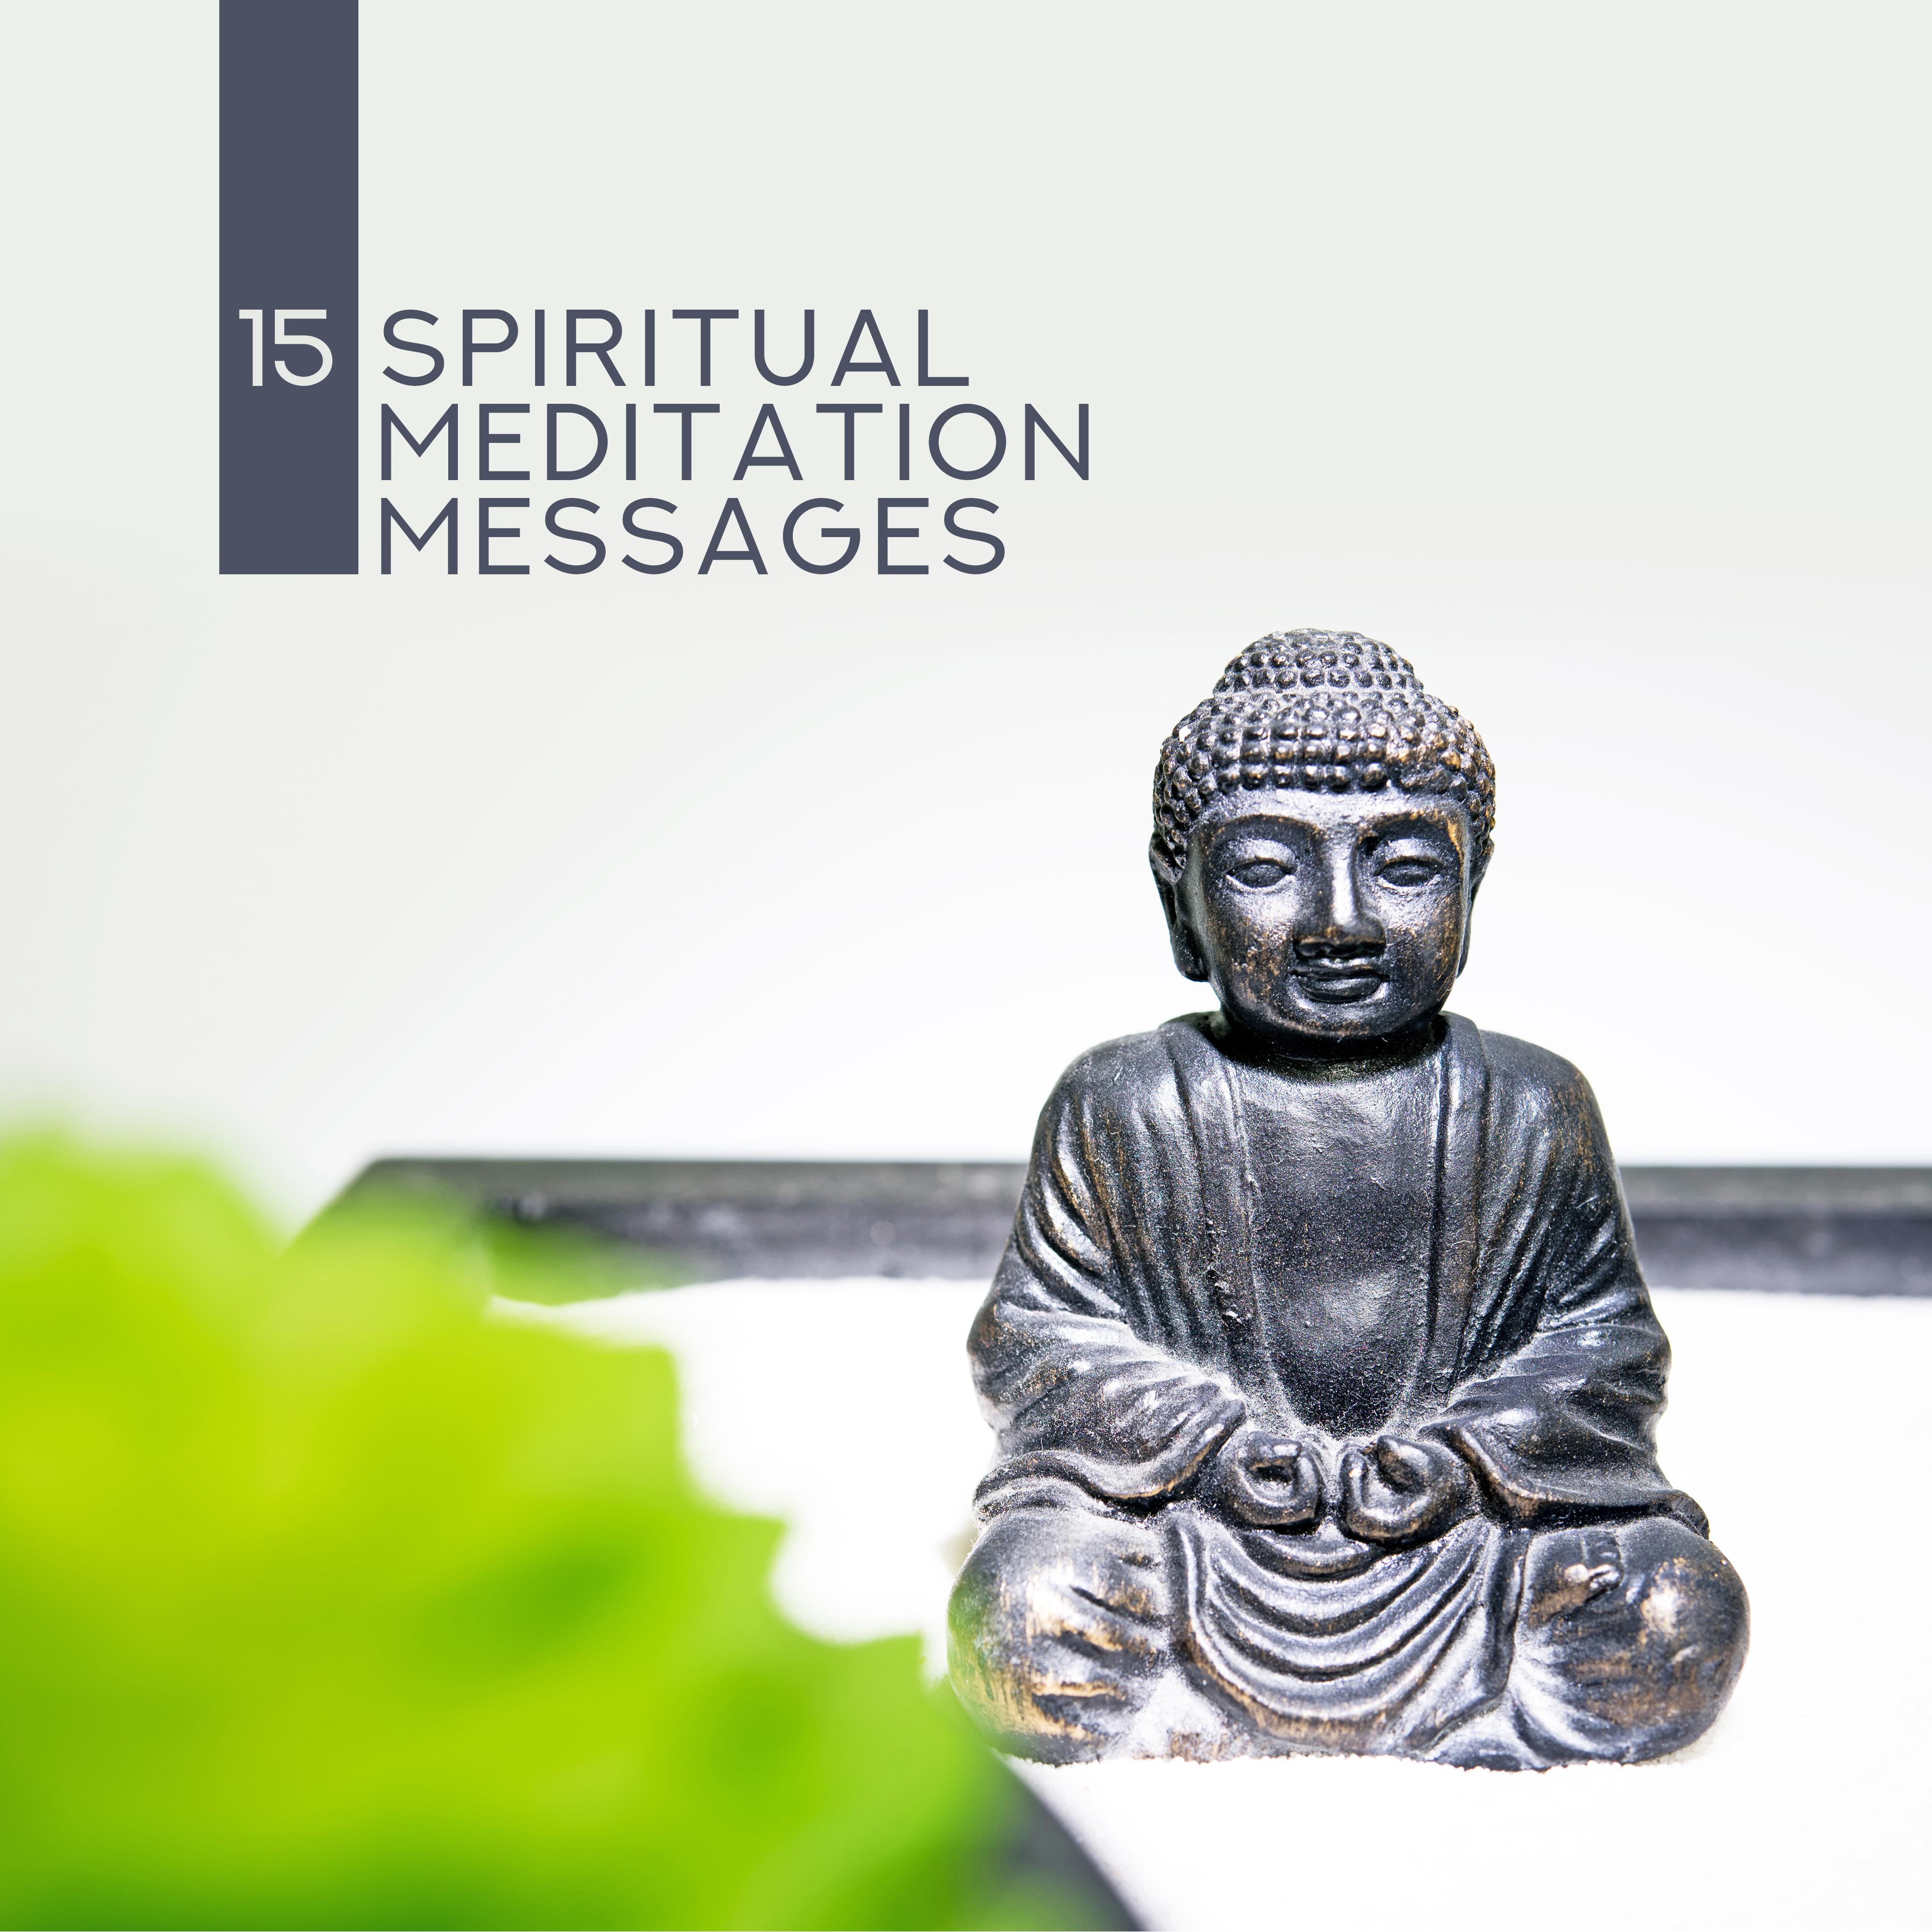 15 Spiritual Meditation Messages: 2019 New Age Compilation for Yoga Poses Training & Deep Relaxation, Mindfulness Journey Into Deepest Places in Soul, Third Eye Opening Session